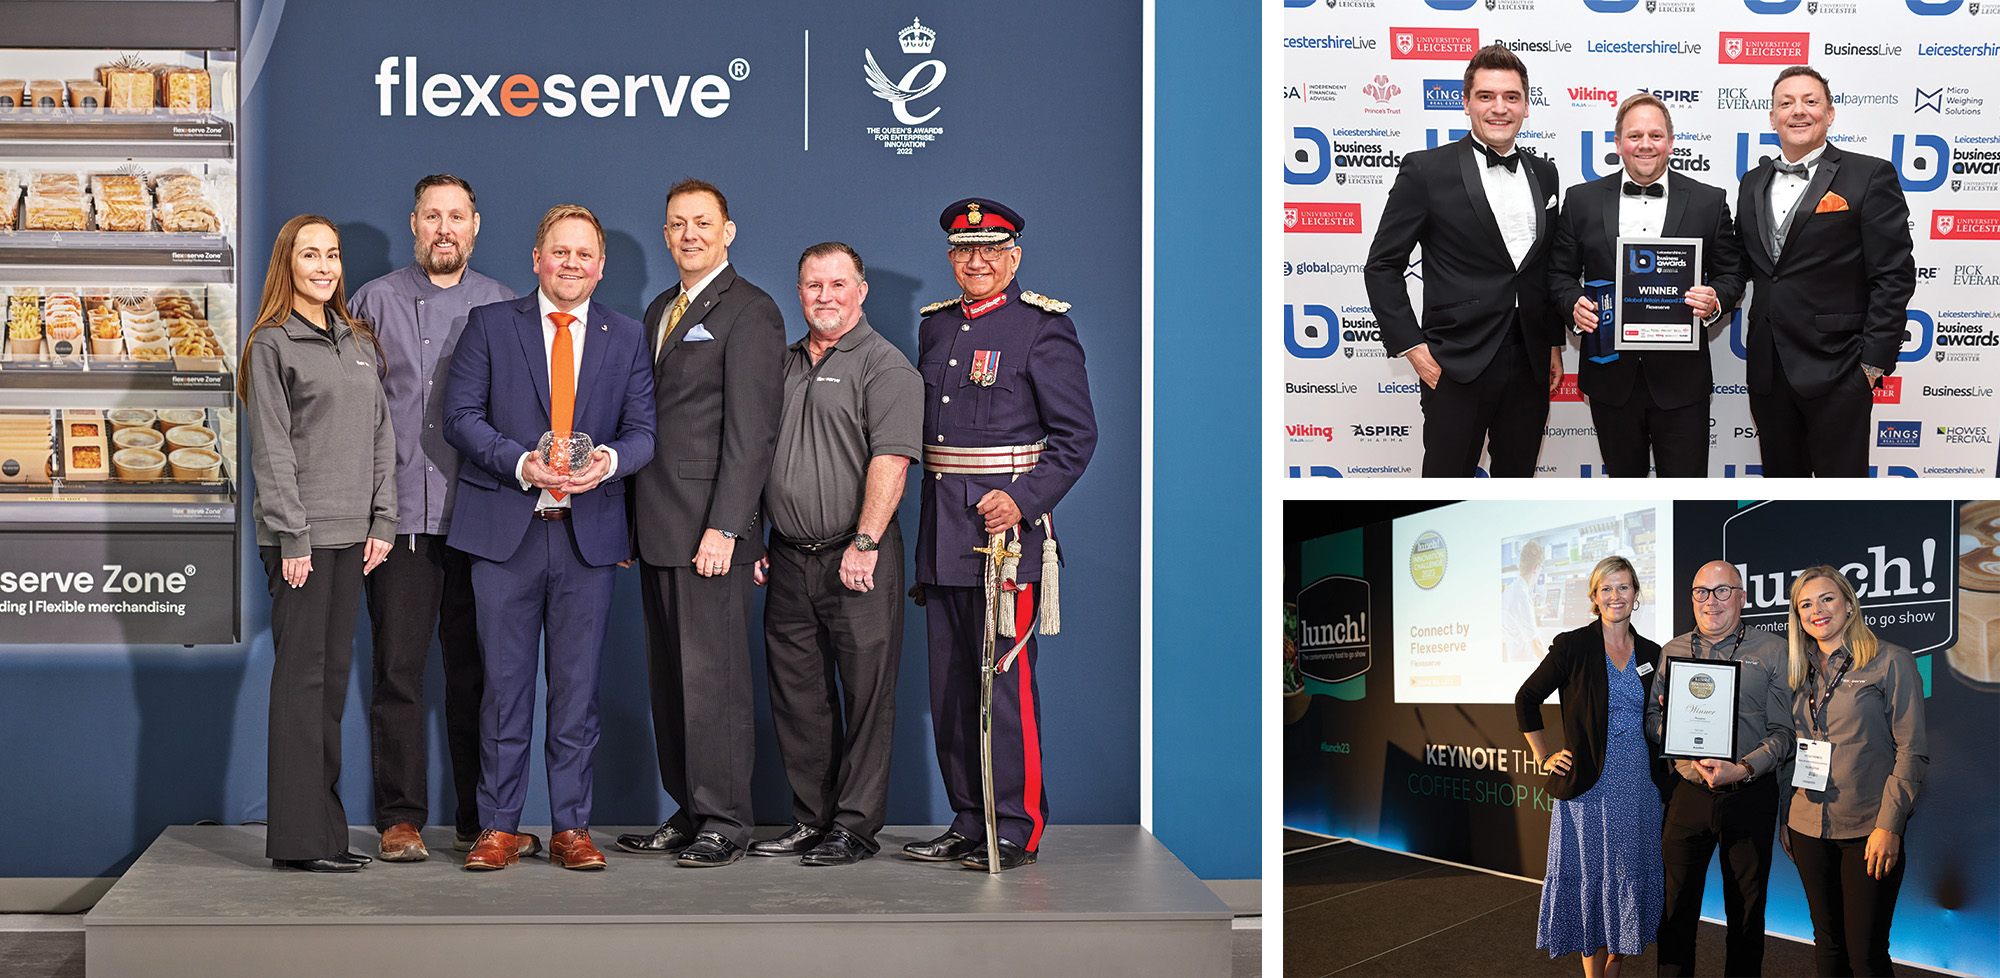 Flexeserve's award presentations for the Queen's Award for Innovation 2022, LeicestershireLive Business Awards 2023 and lunch! Show Gold Innovation Award